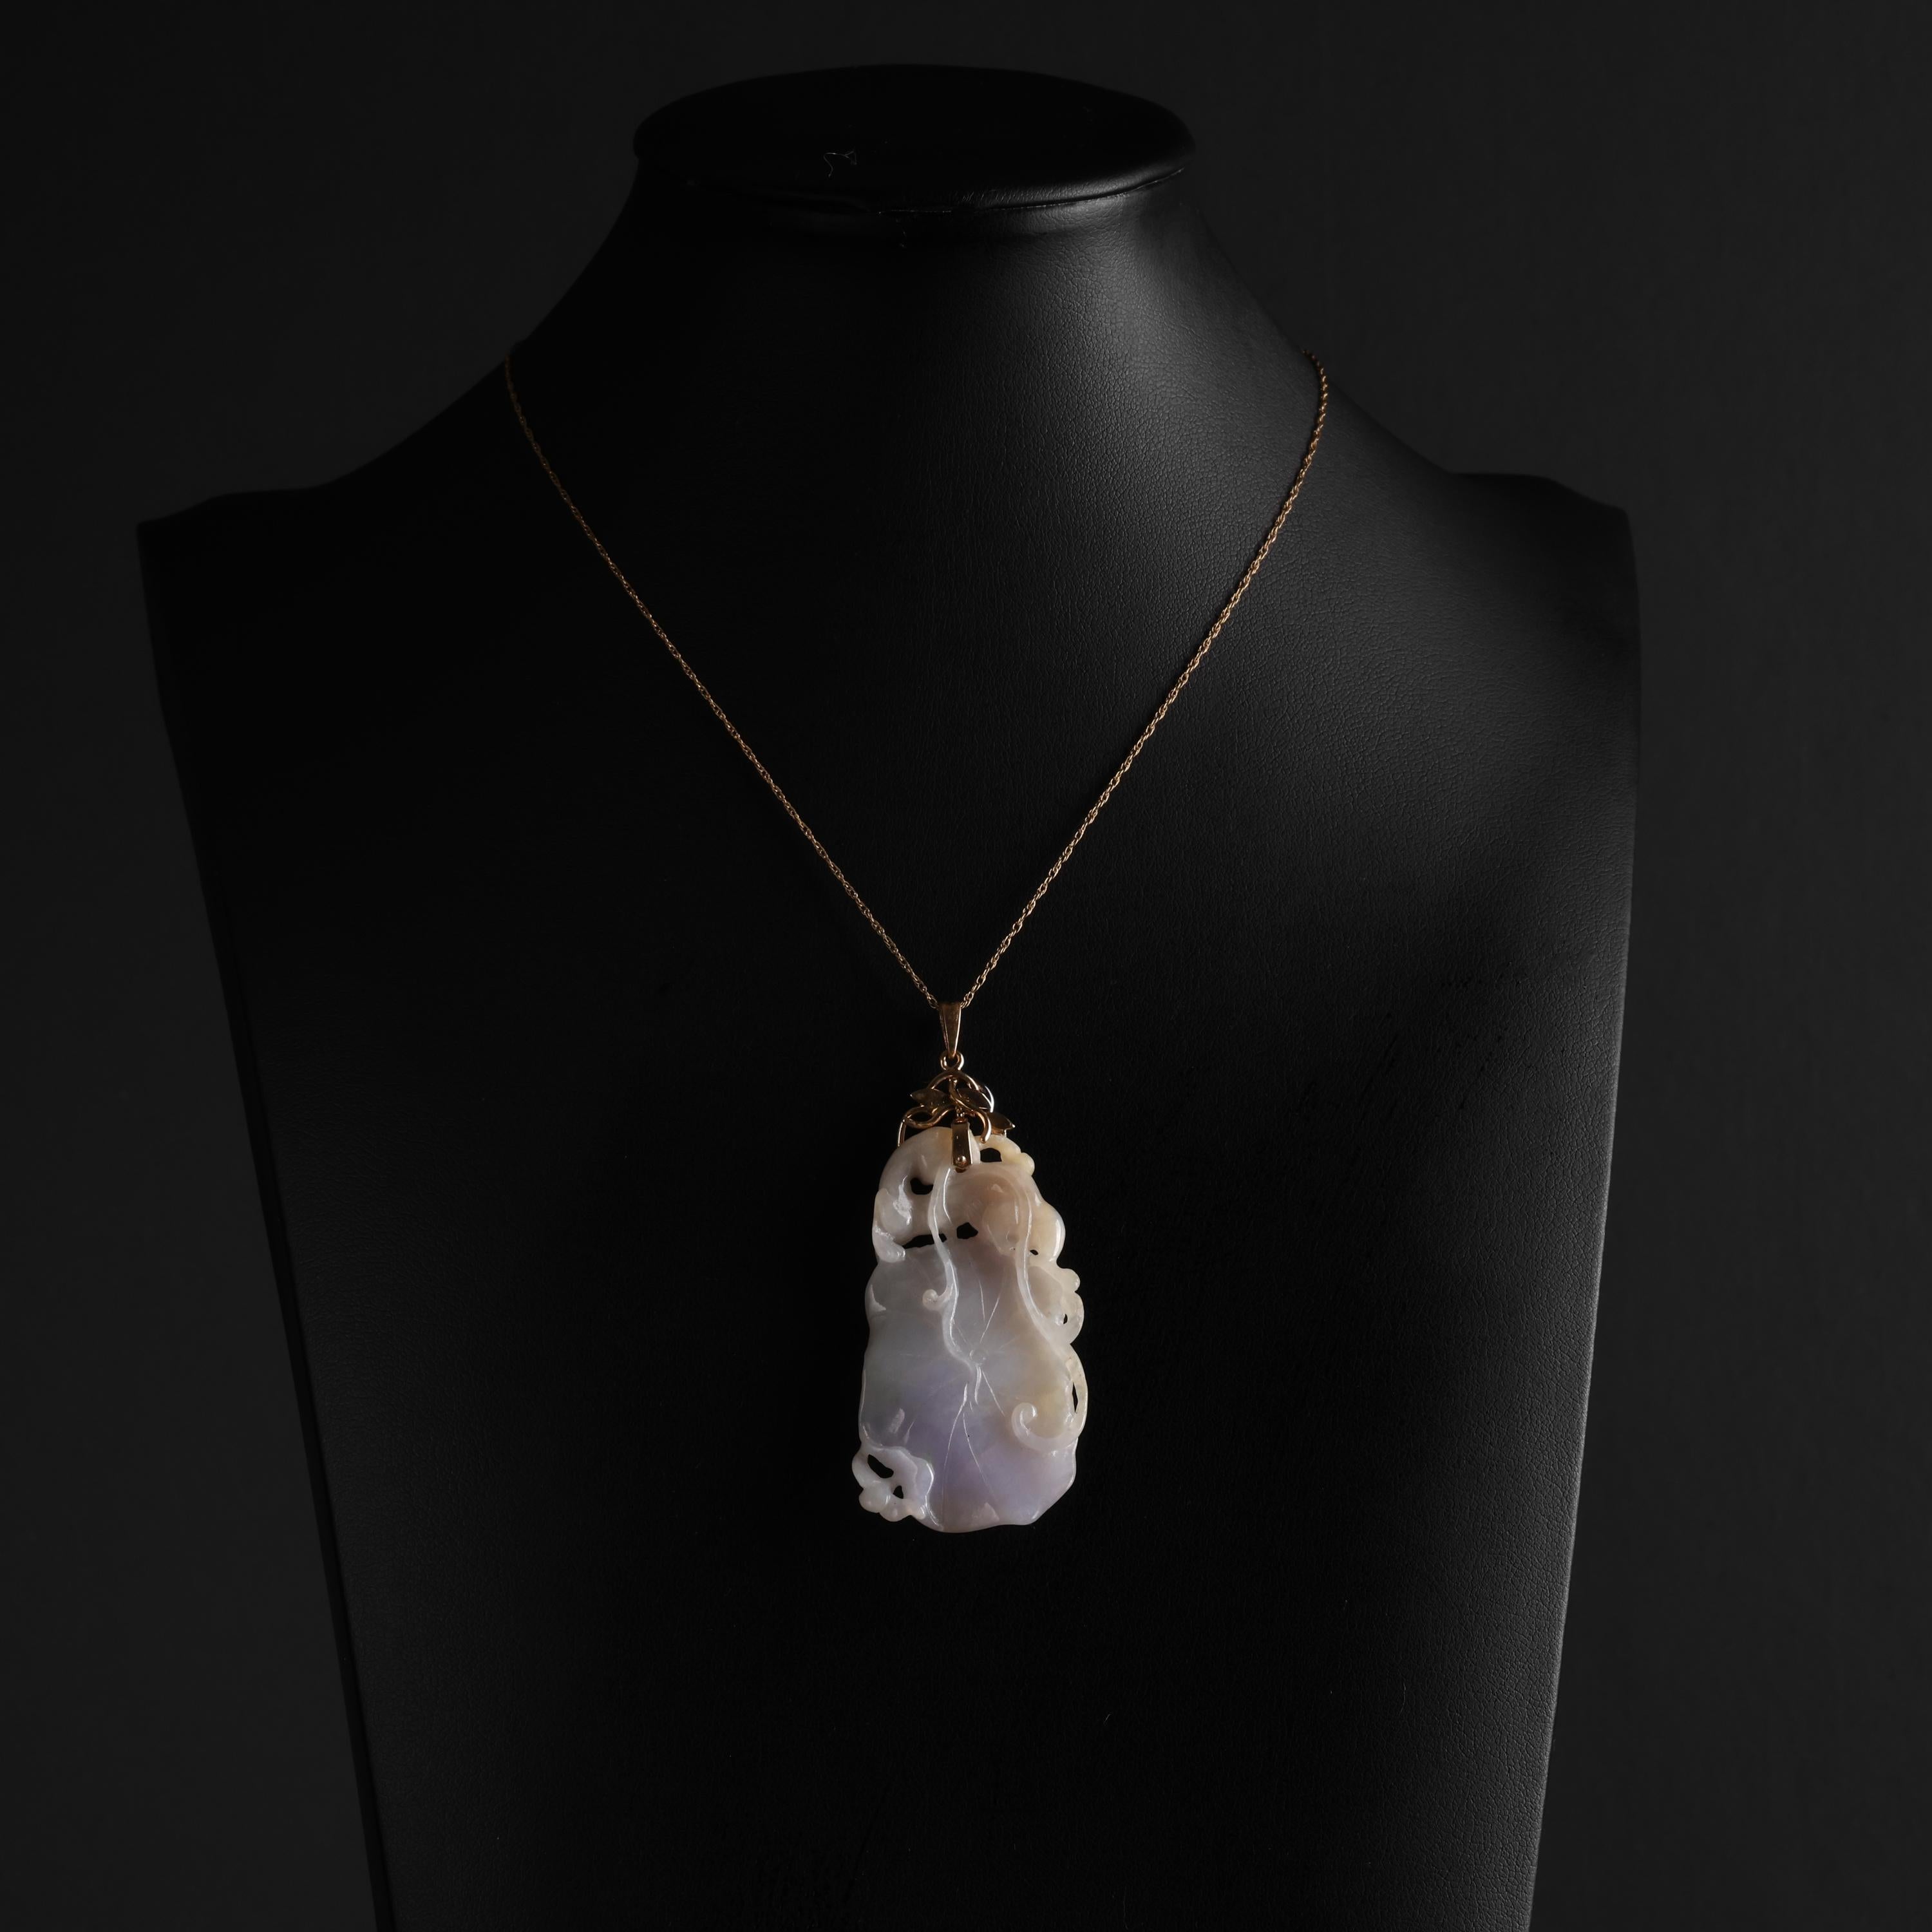 The true beauty of this carved jadeite jade pendant is difficult to capture in photographs; more difficult still to describe in words. Carved by hand in the form of an entangled squash blossom, the jade stone is highly translucent; the light